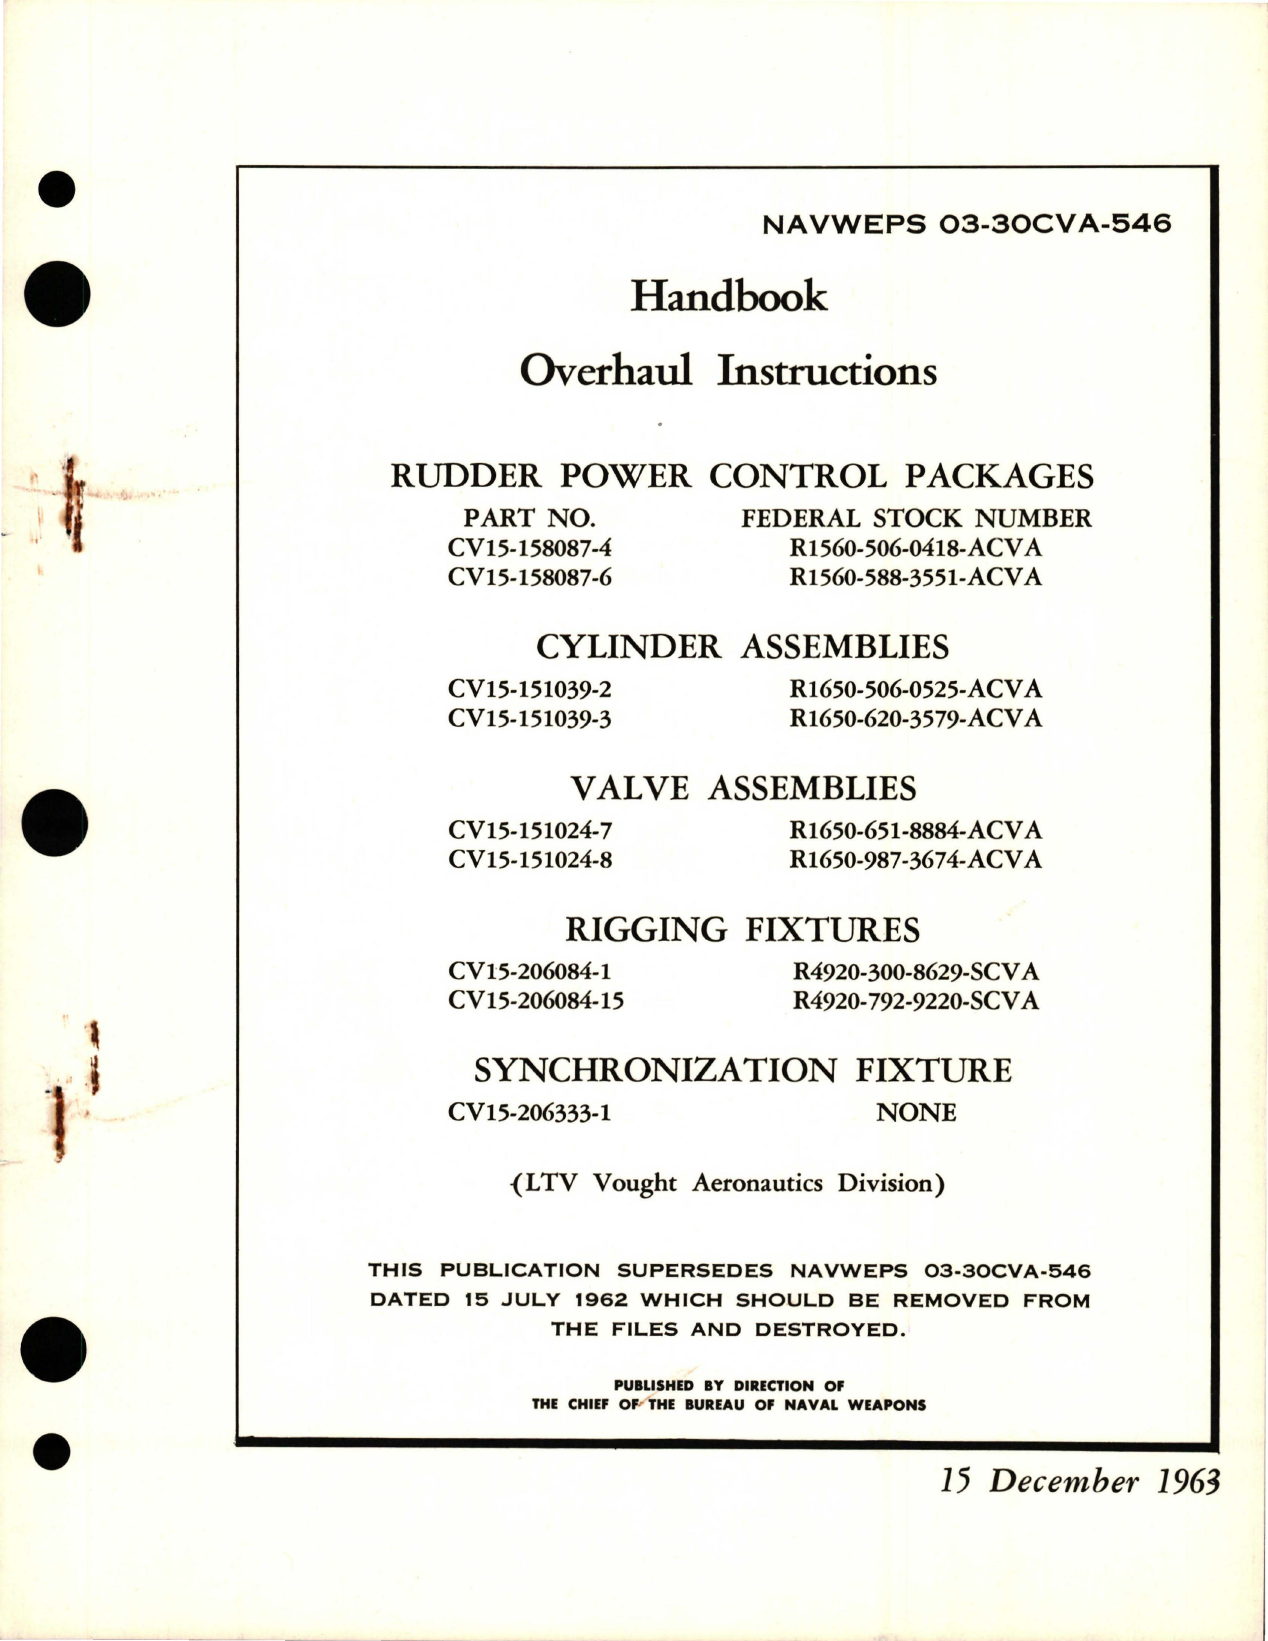 Sample page 1 from AirCorps Library document: Overhaul Instructions for Rudder Control, Cylinder Assy, Valve Assy, Rigging Fixtures, Synchronization Fixture